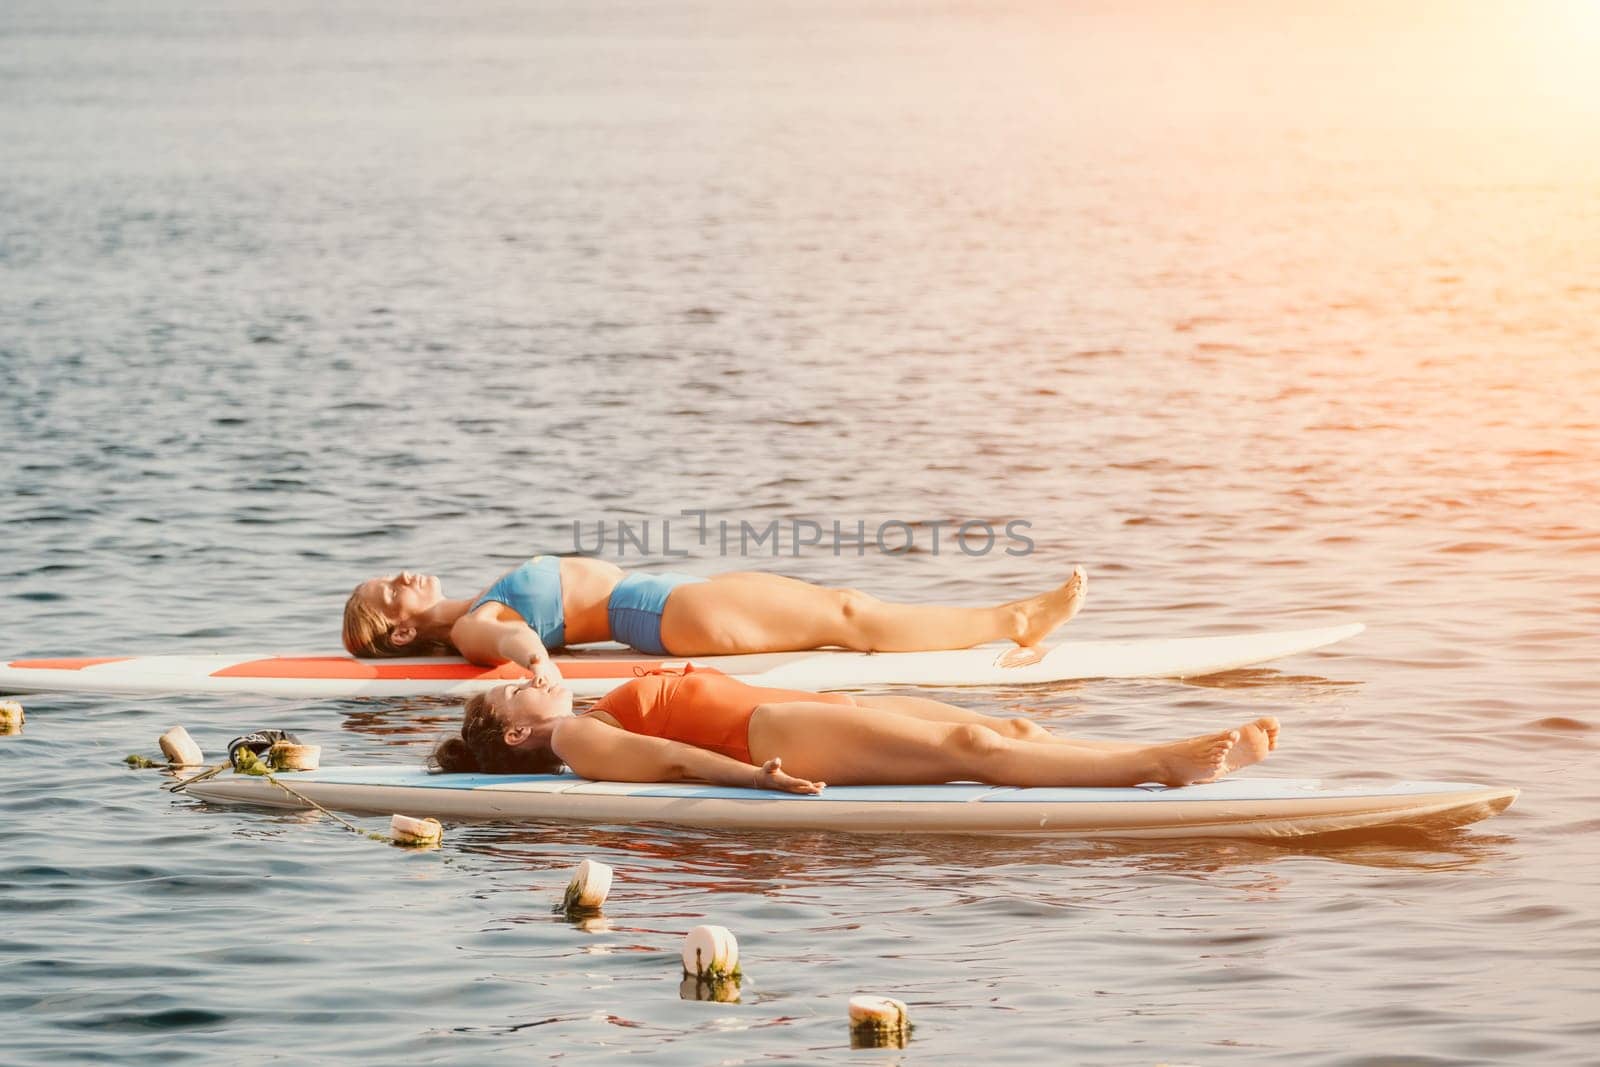 Woman sup yoga. Middle age sporty woman practising yoga pilates on paddle sup surfboard. Female stretching doing workout on sea water. Modern individual hipster outdoor summer sport activity